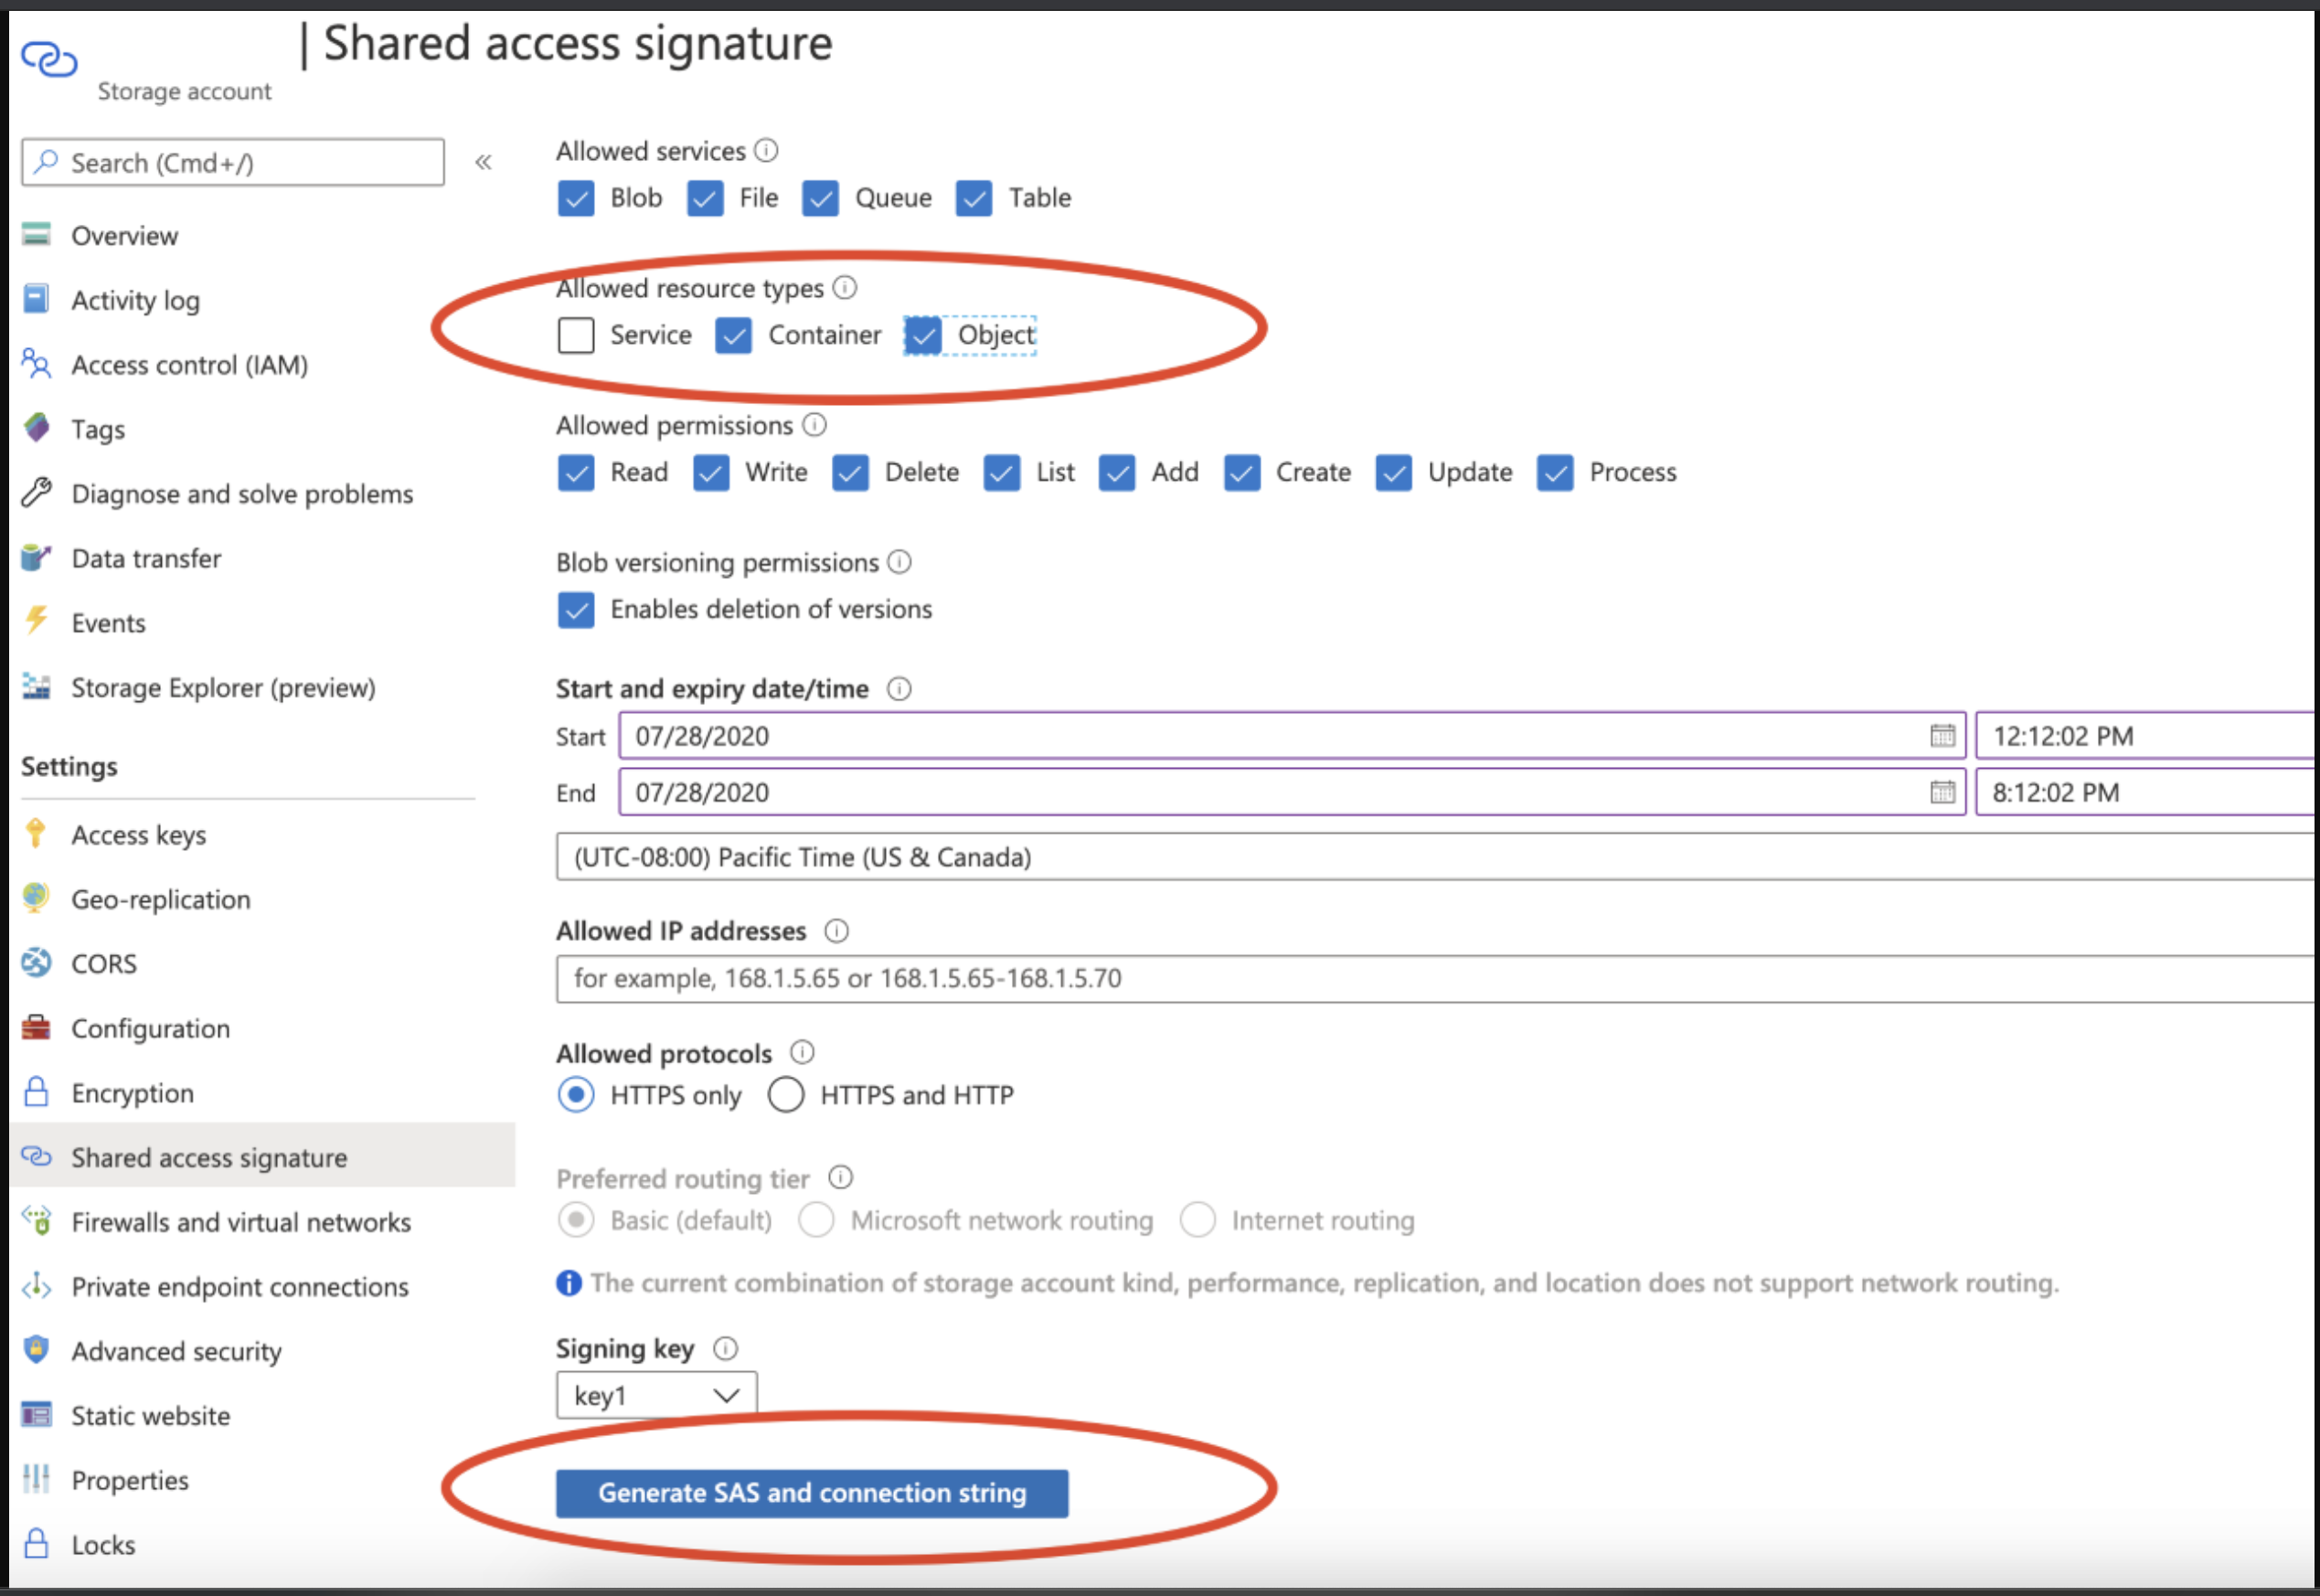 Creating a SAS token from a storage account in Azure